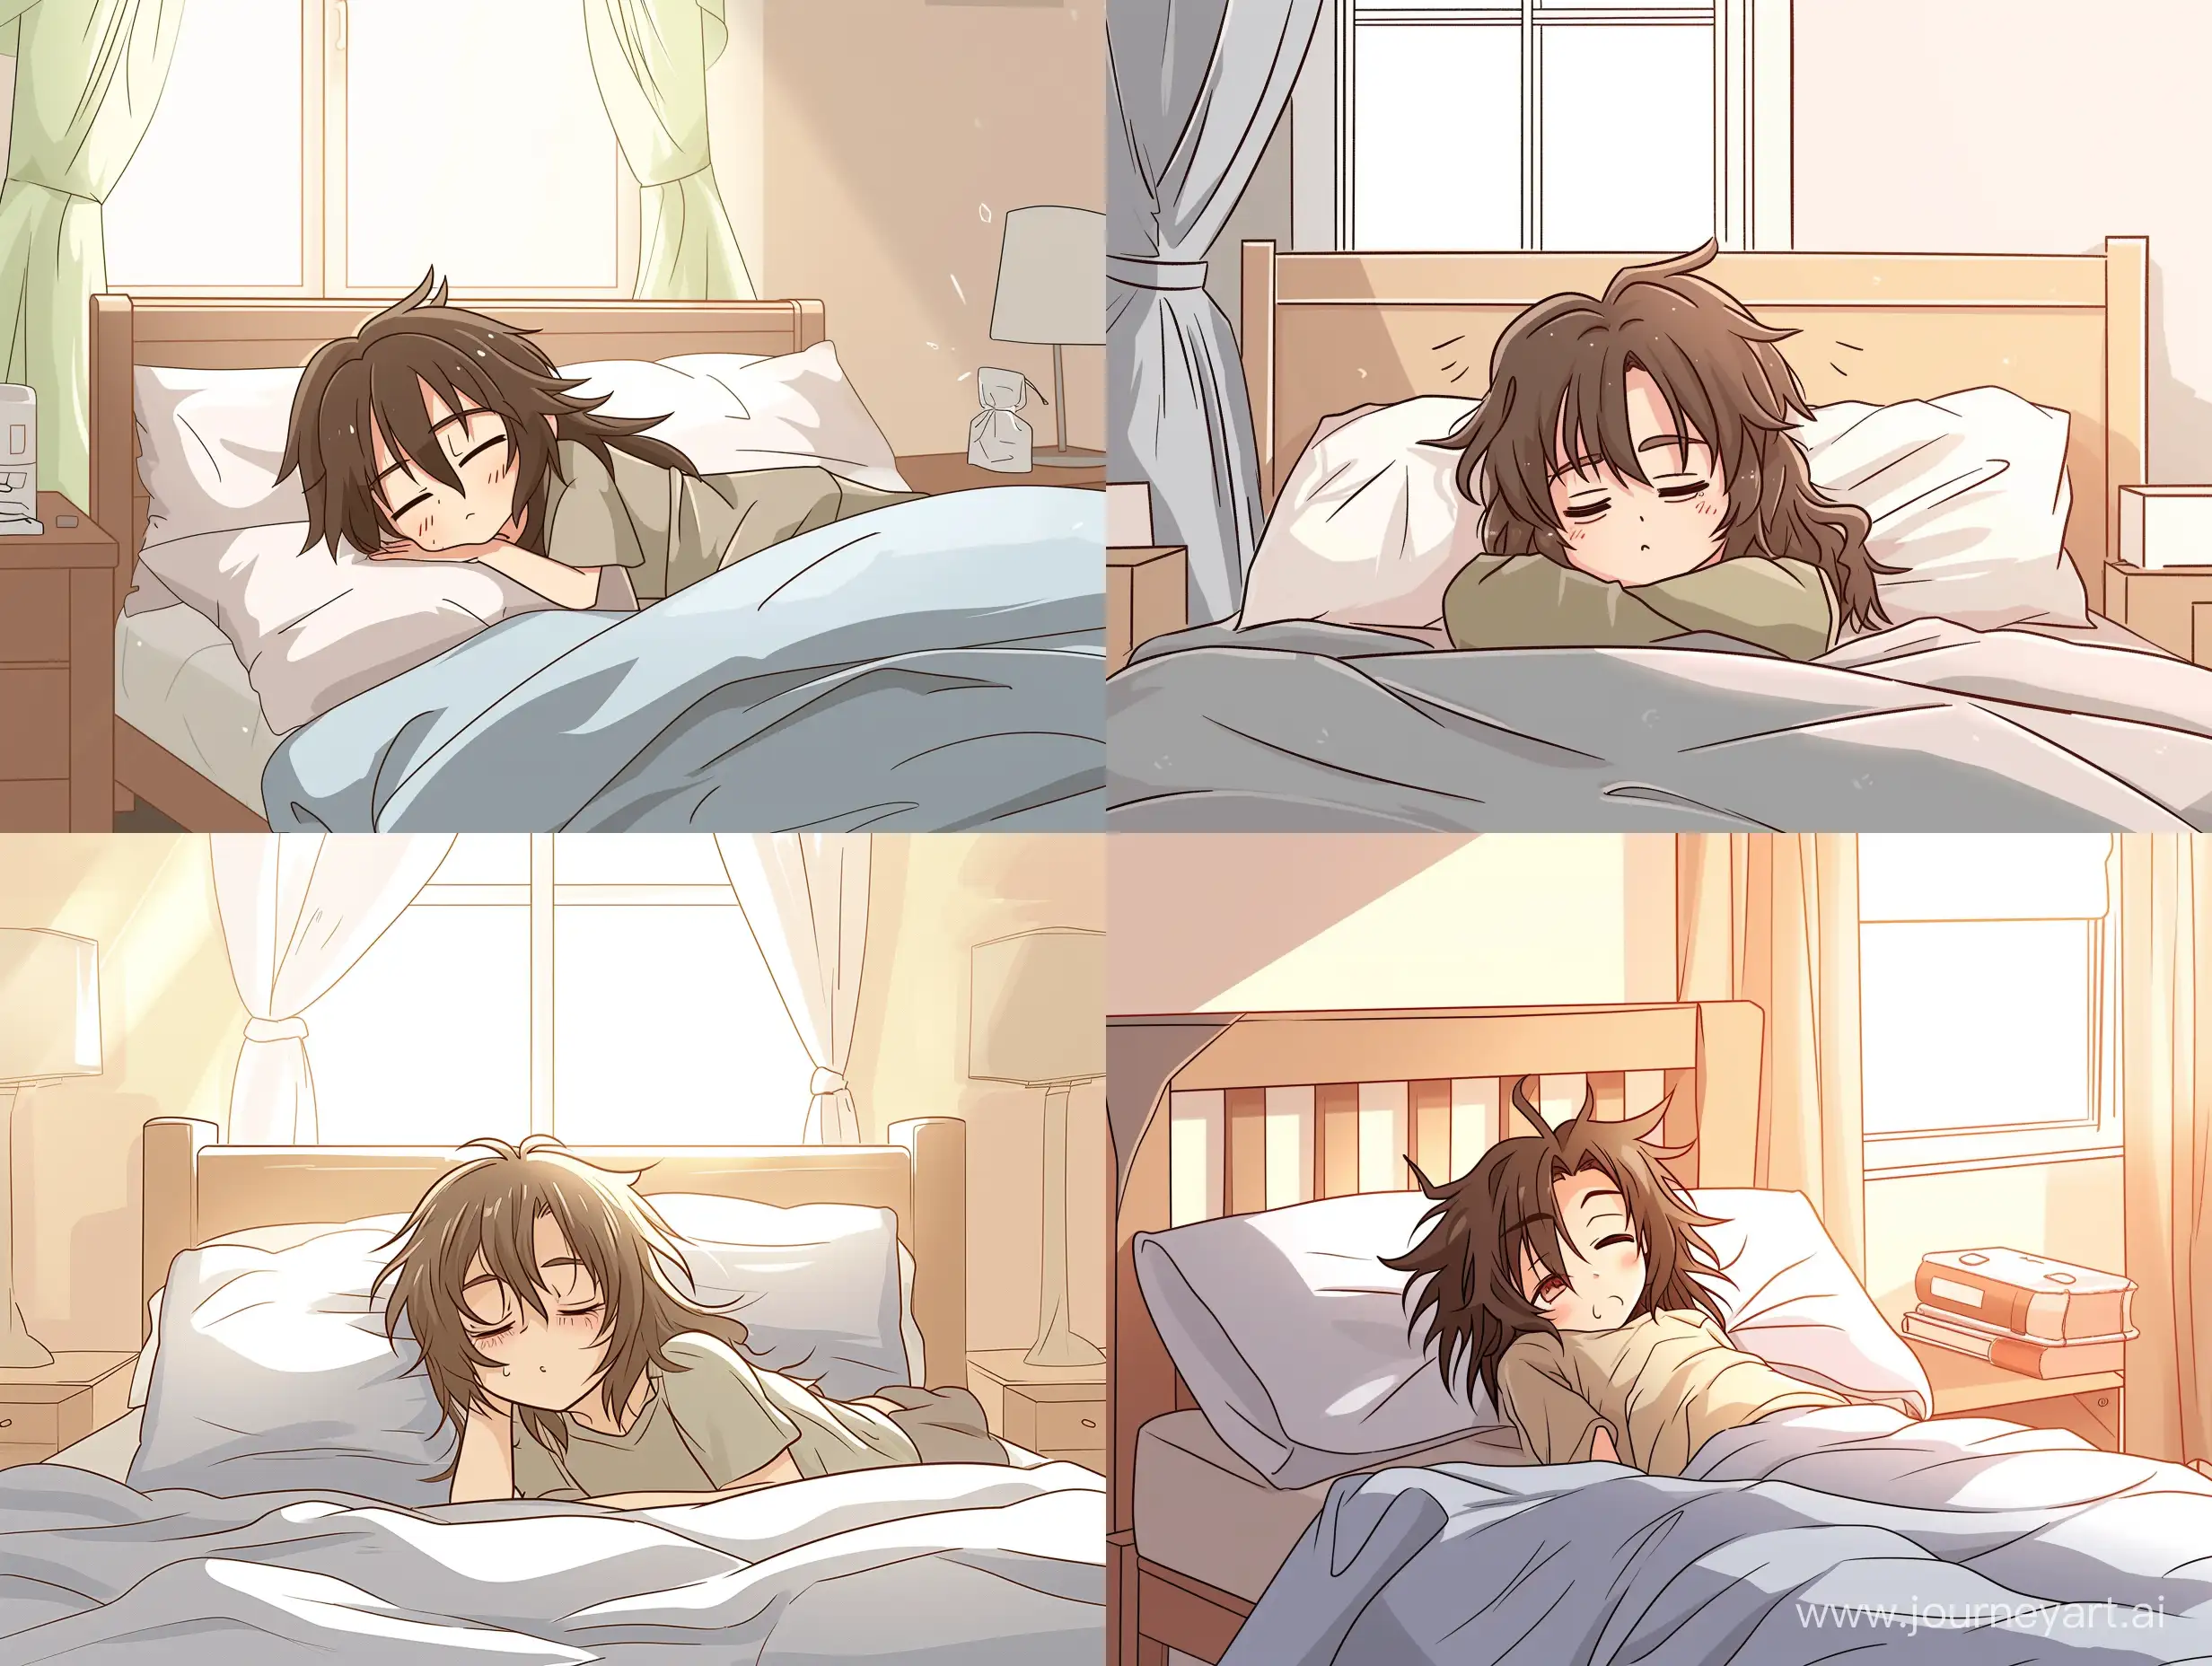 Anime-Boy-with-Long-Hair-Waking-Up-in-Chibi-Style-Bedroom